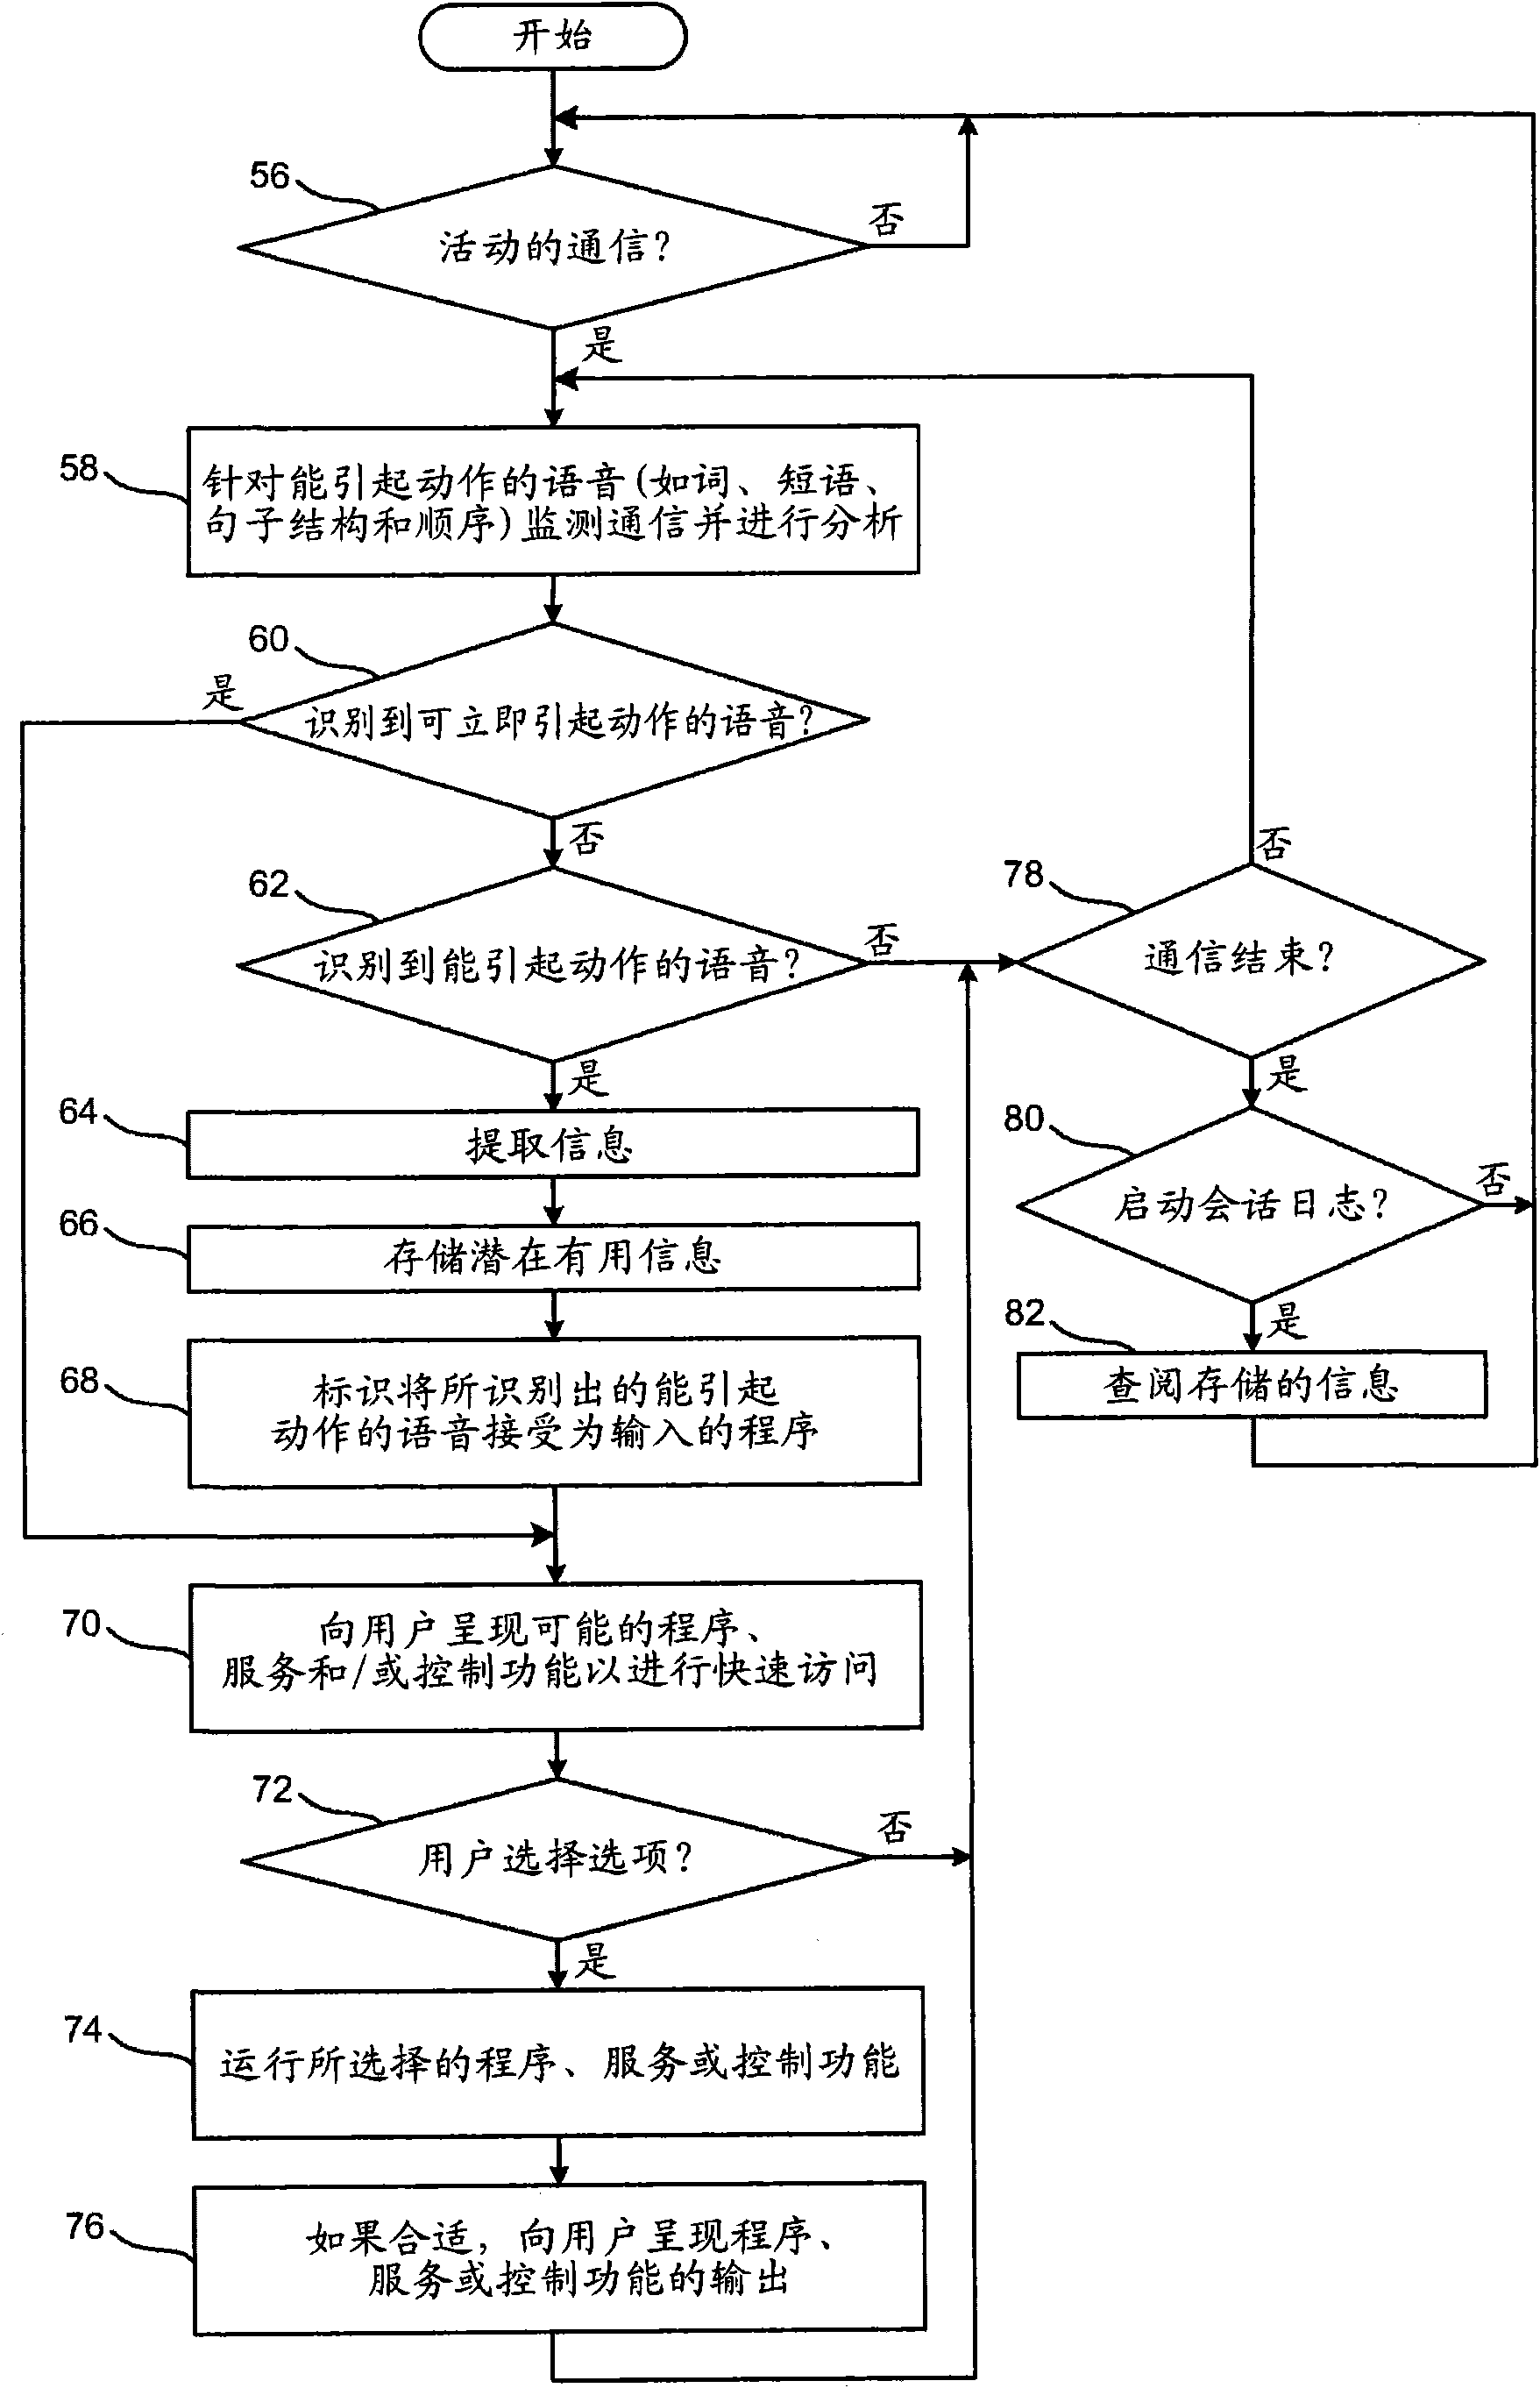 Mobile electronic device with active speech recognition